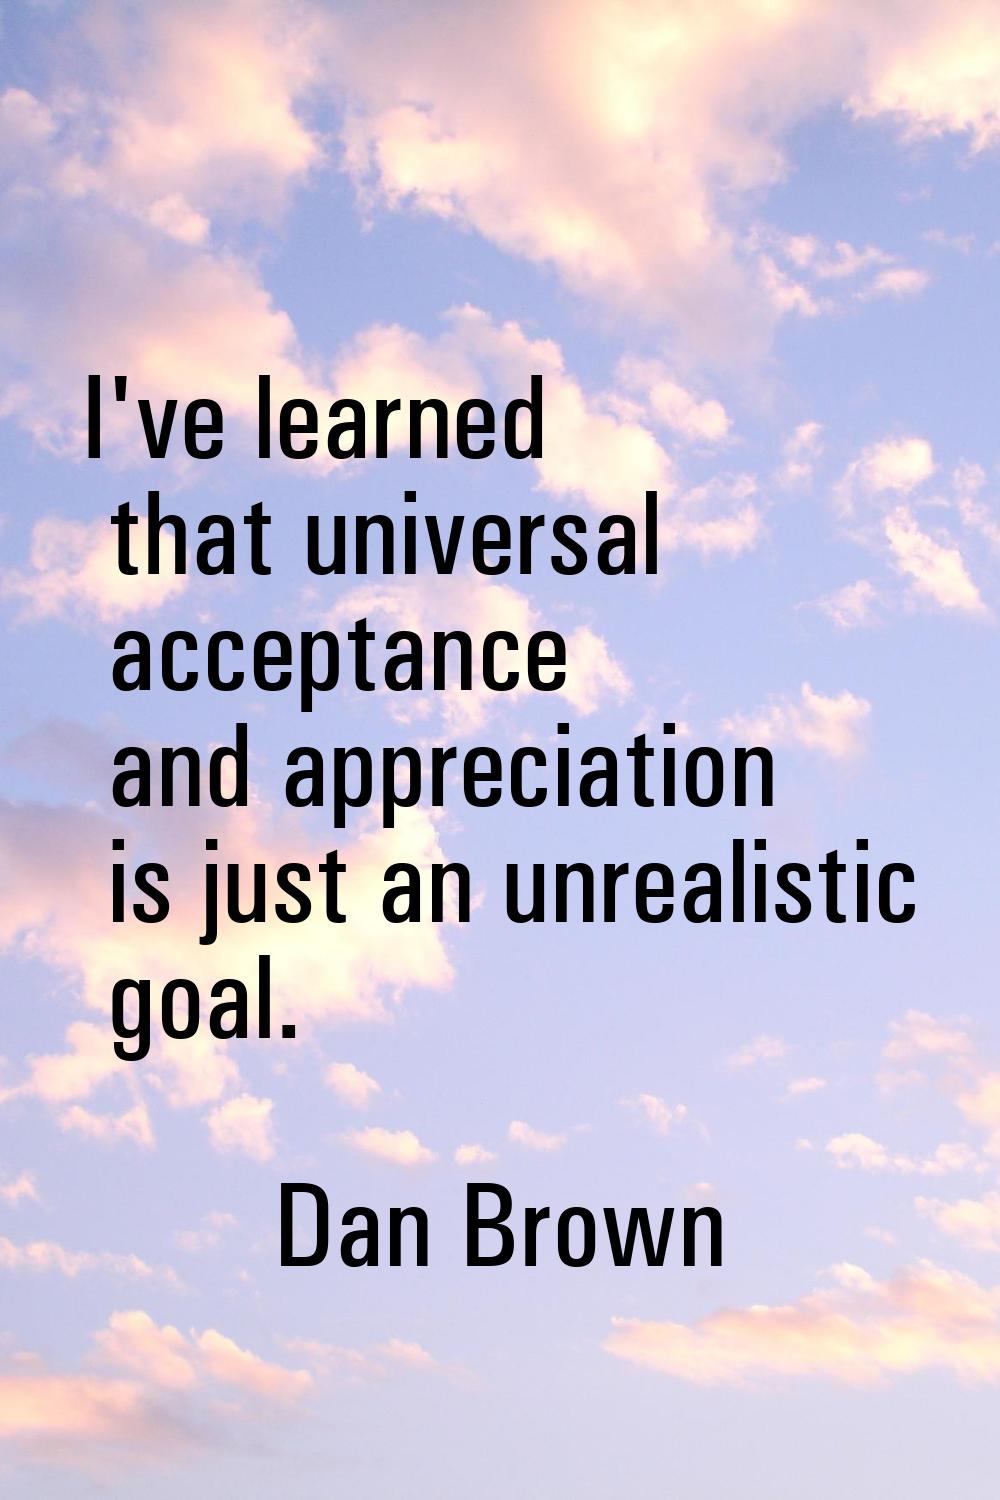 I've learned that universal acceptance and appreciation is just an unrealistic goal.